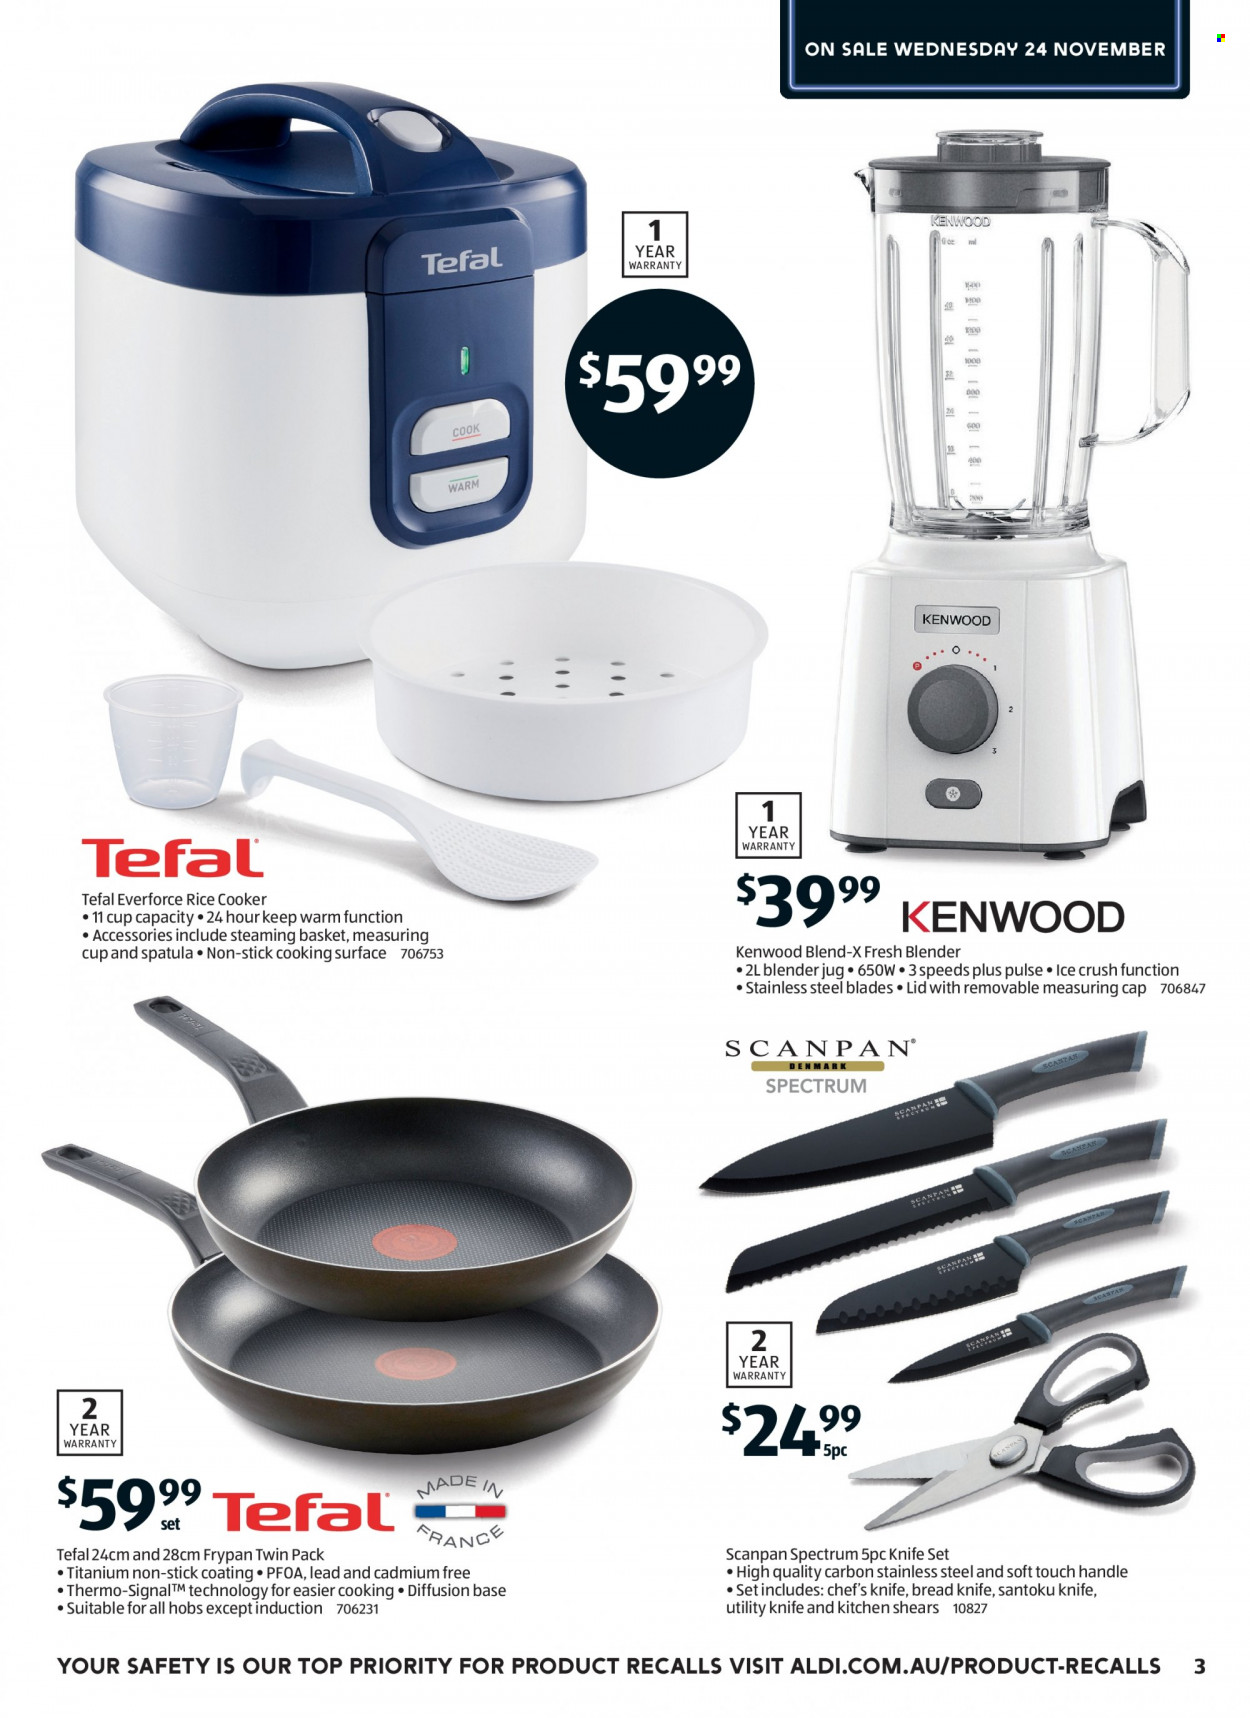 thumbnail - ALDI Catalogue - 24 Nov 2021 - 30 Nov 2021 - Sales products - Tefal, bread, basket, lid, spatula, chef’s knife, rice cooker, measuring cup, frying pan, blender, Kenwood, cap, utility knife, Spectrum. Page 3.